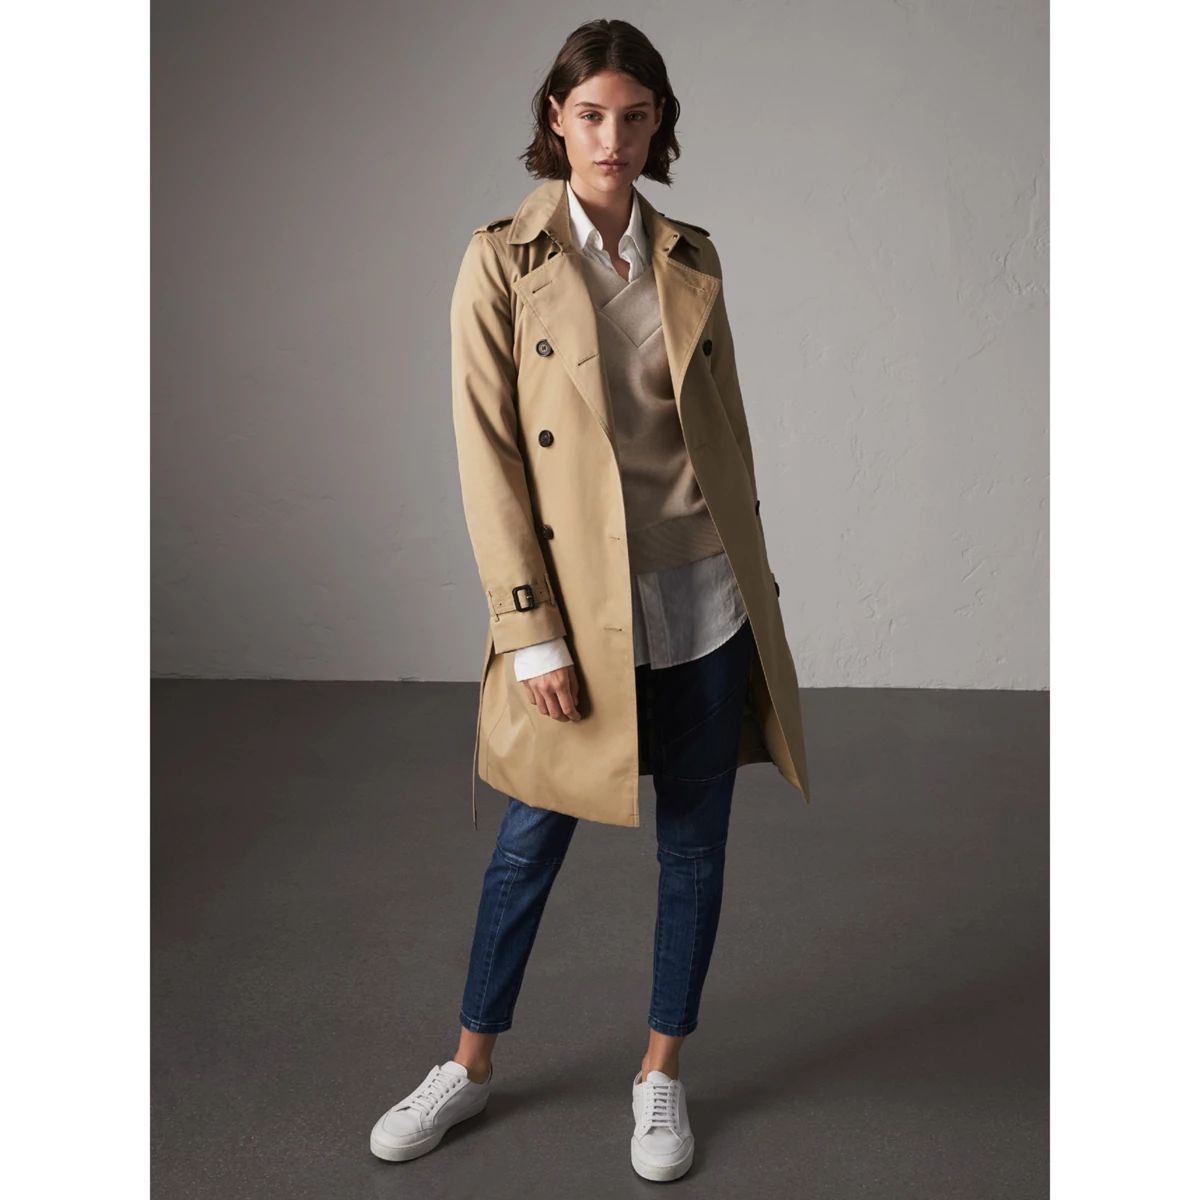 Burberry The Kensington - Long Heritage Trench Coat, Size: 12, Yellow | Burberry (US)